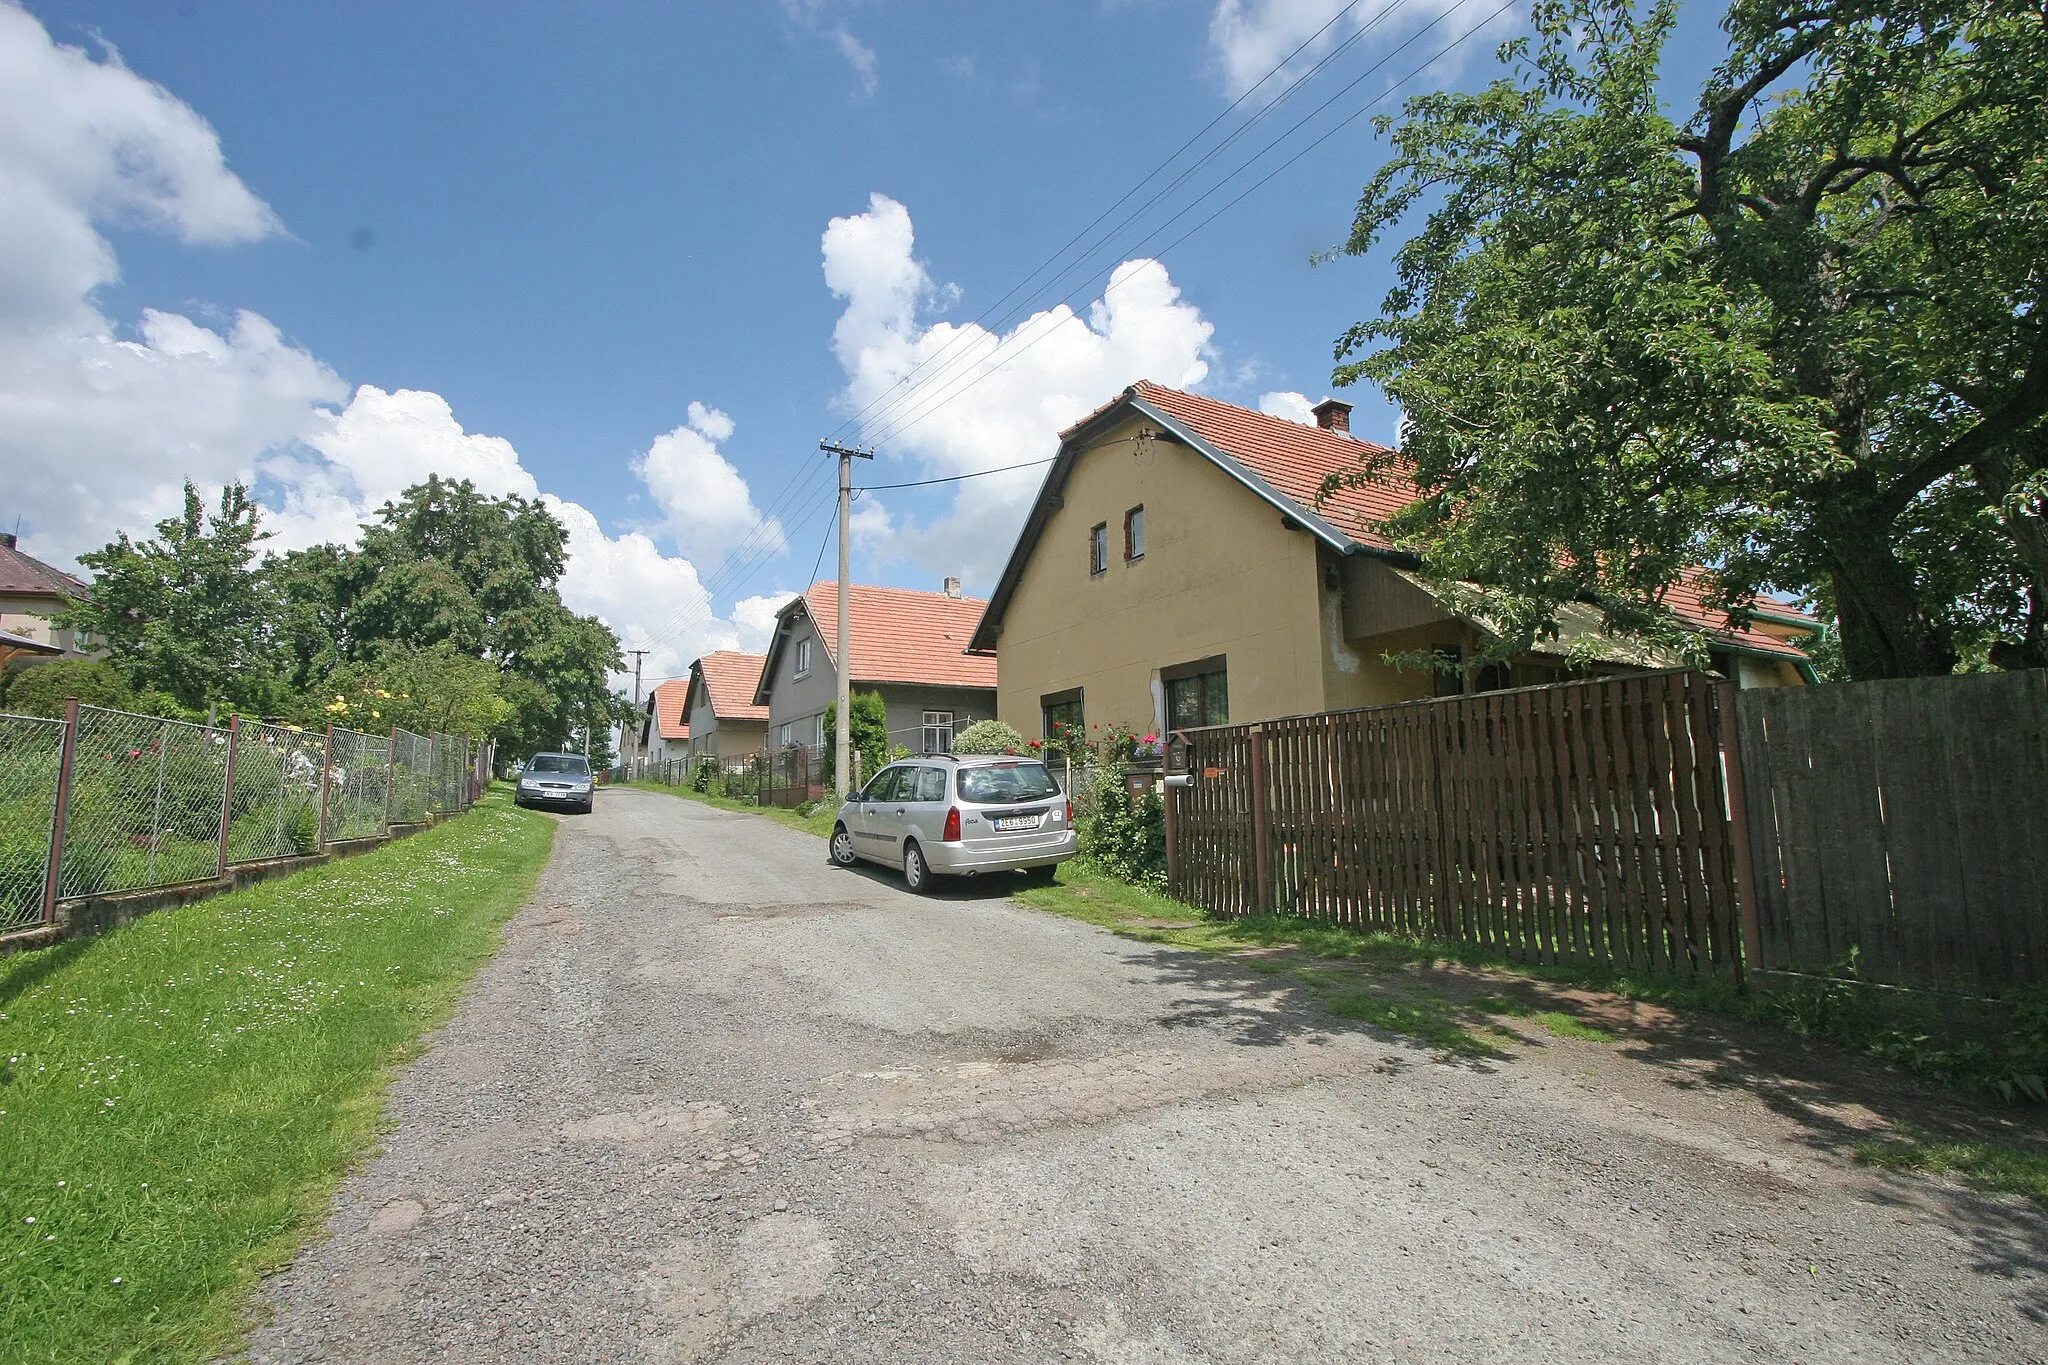 Photo showing: Trpišov čp. 69
Camera location 49° 53′ 26.89″ N, 15° 47′ 40.6″ E View this and other nearby images on: OpenStreetMap 49.890802;   15.794612

This file was created as a part of the photographic program of Wikimedia Czech Republic. Project: Foto českých obcí The program supports Wikimedia Commons photographers in the Czech Republic.